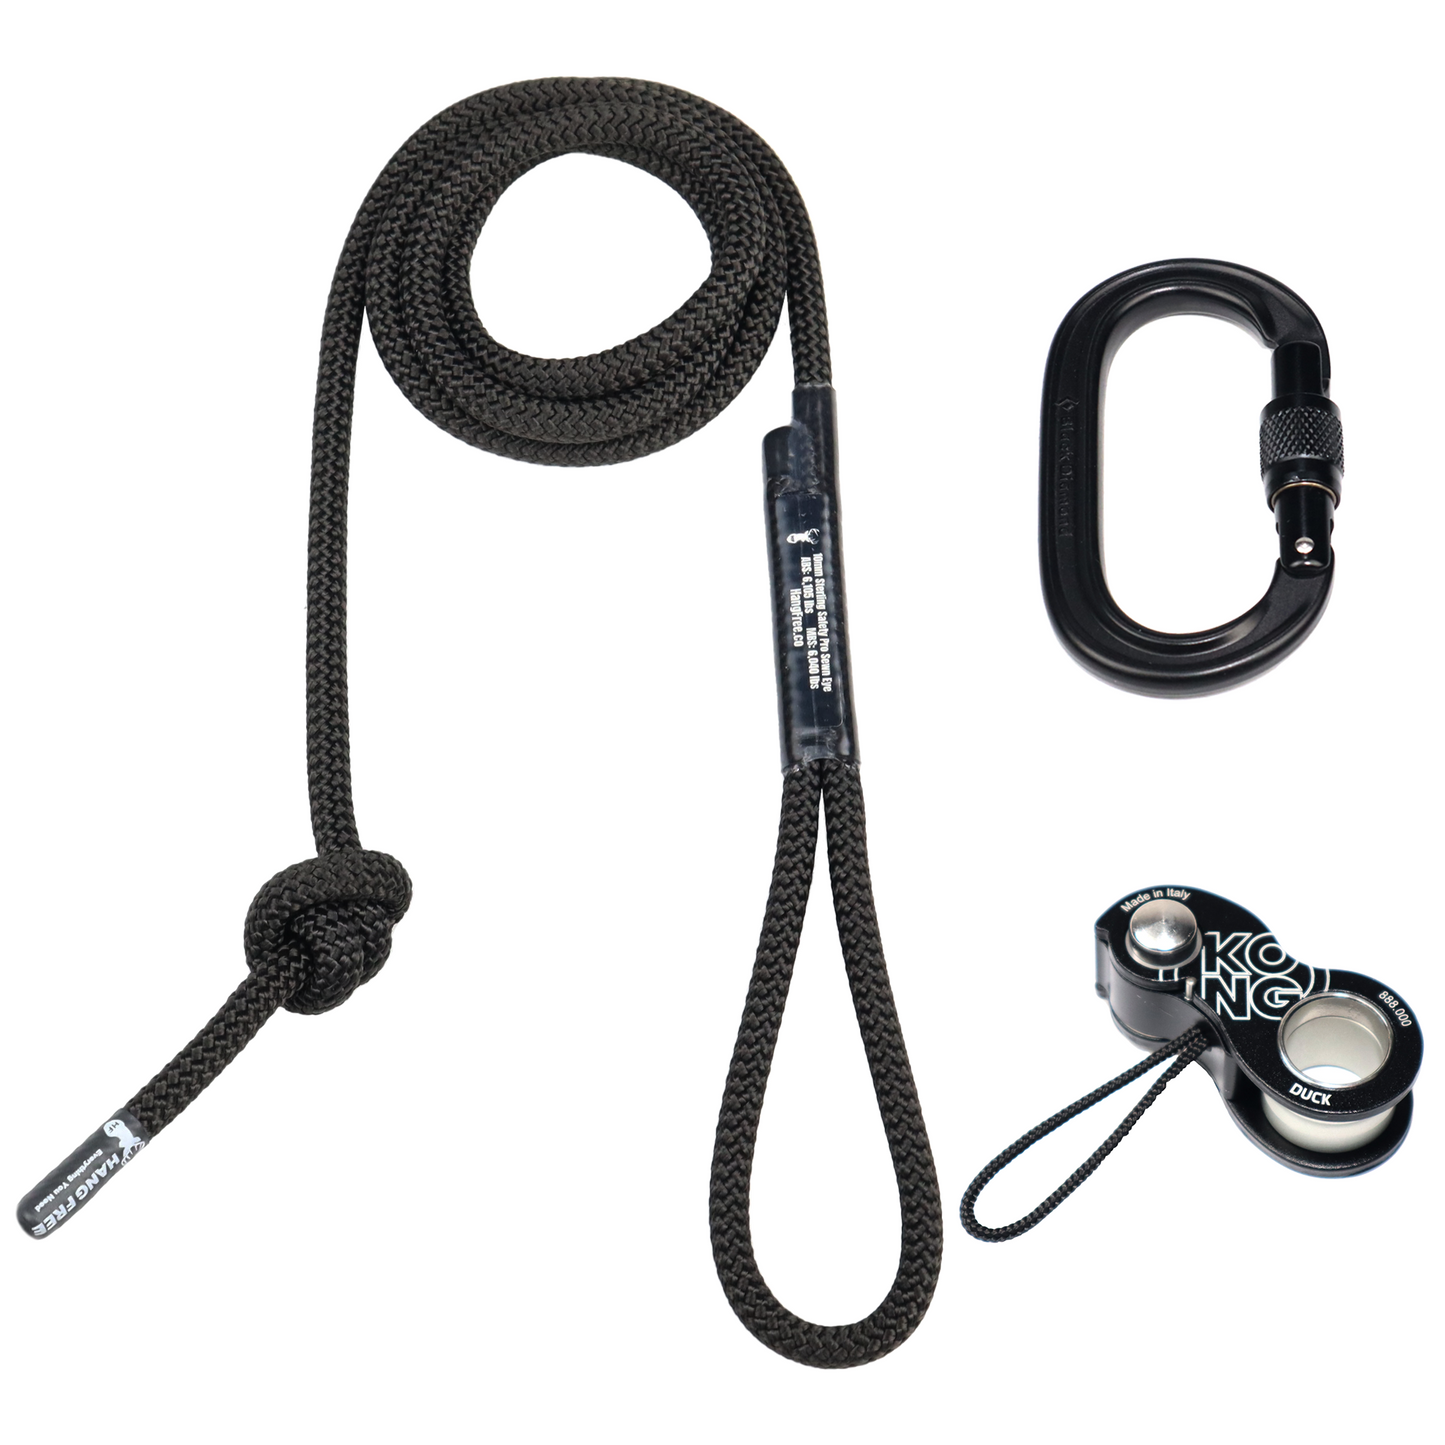 10mm BlackOut Deluxe Tether & Lineman's with Carabiner